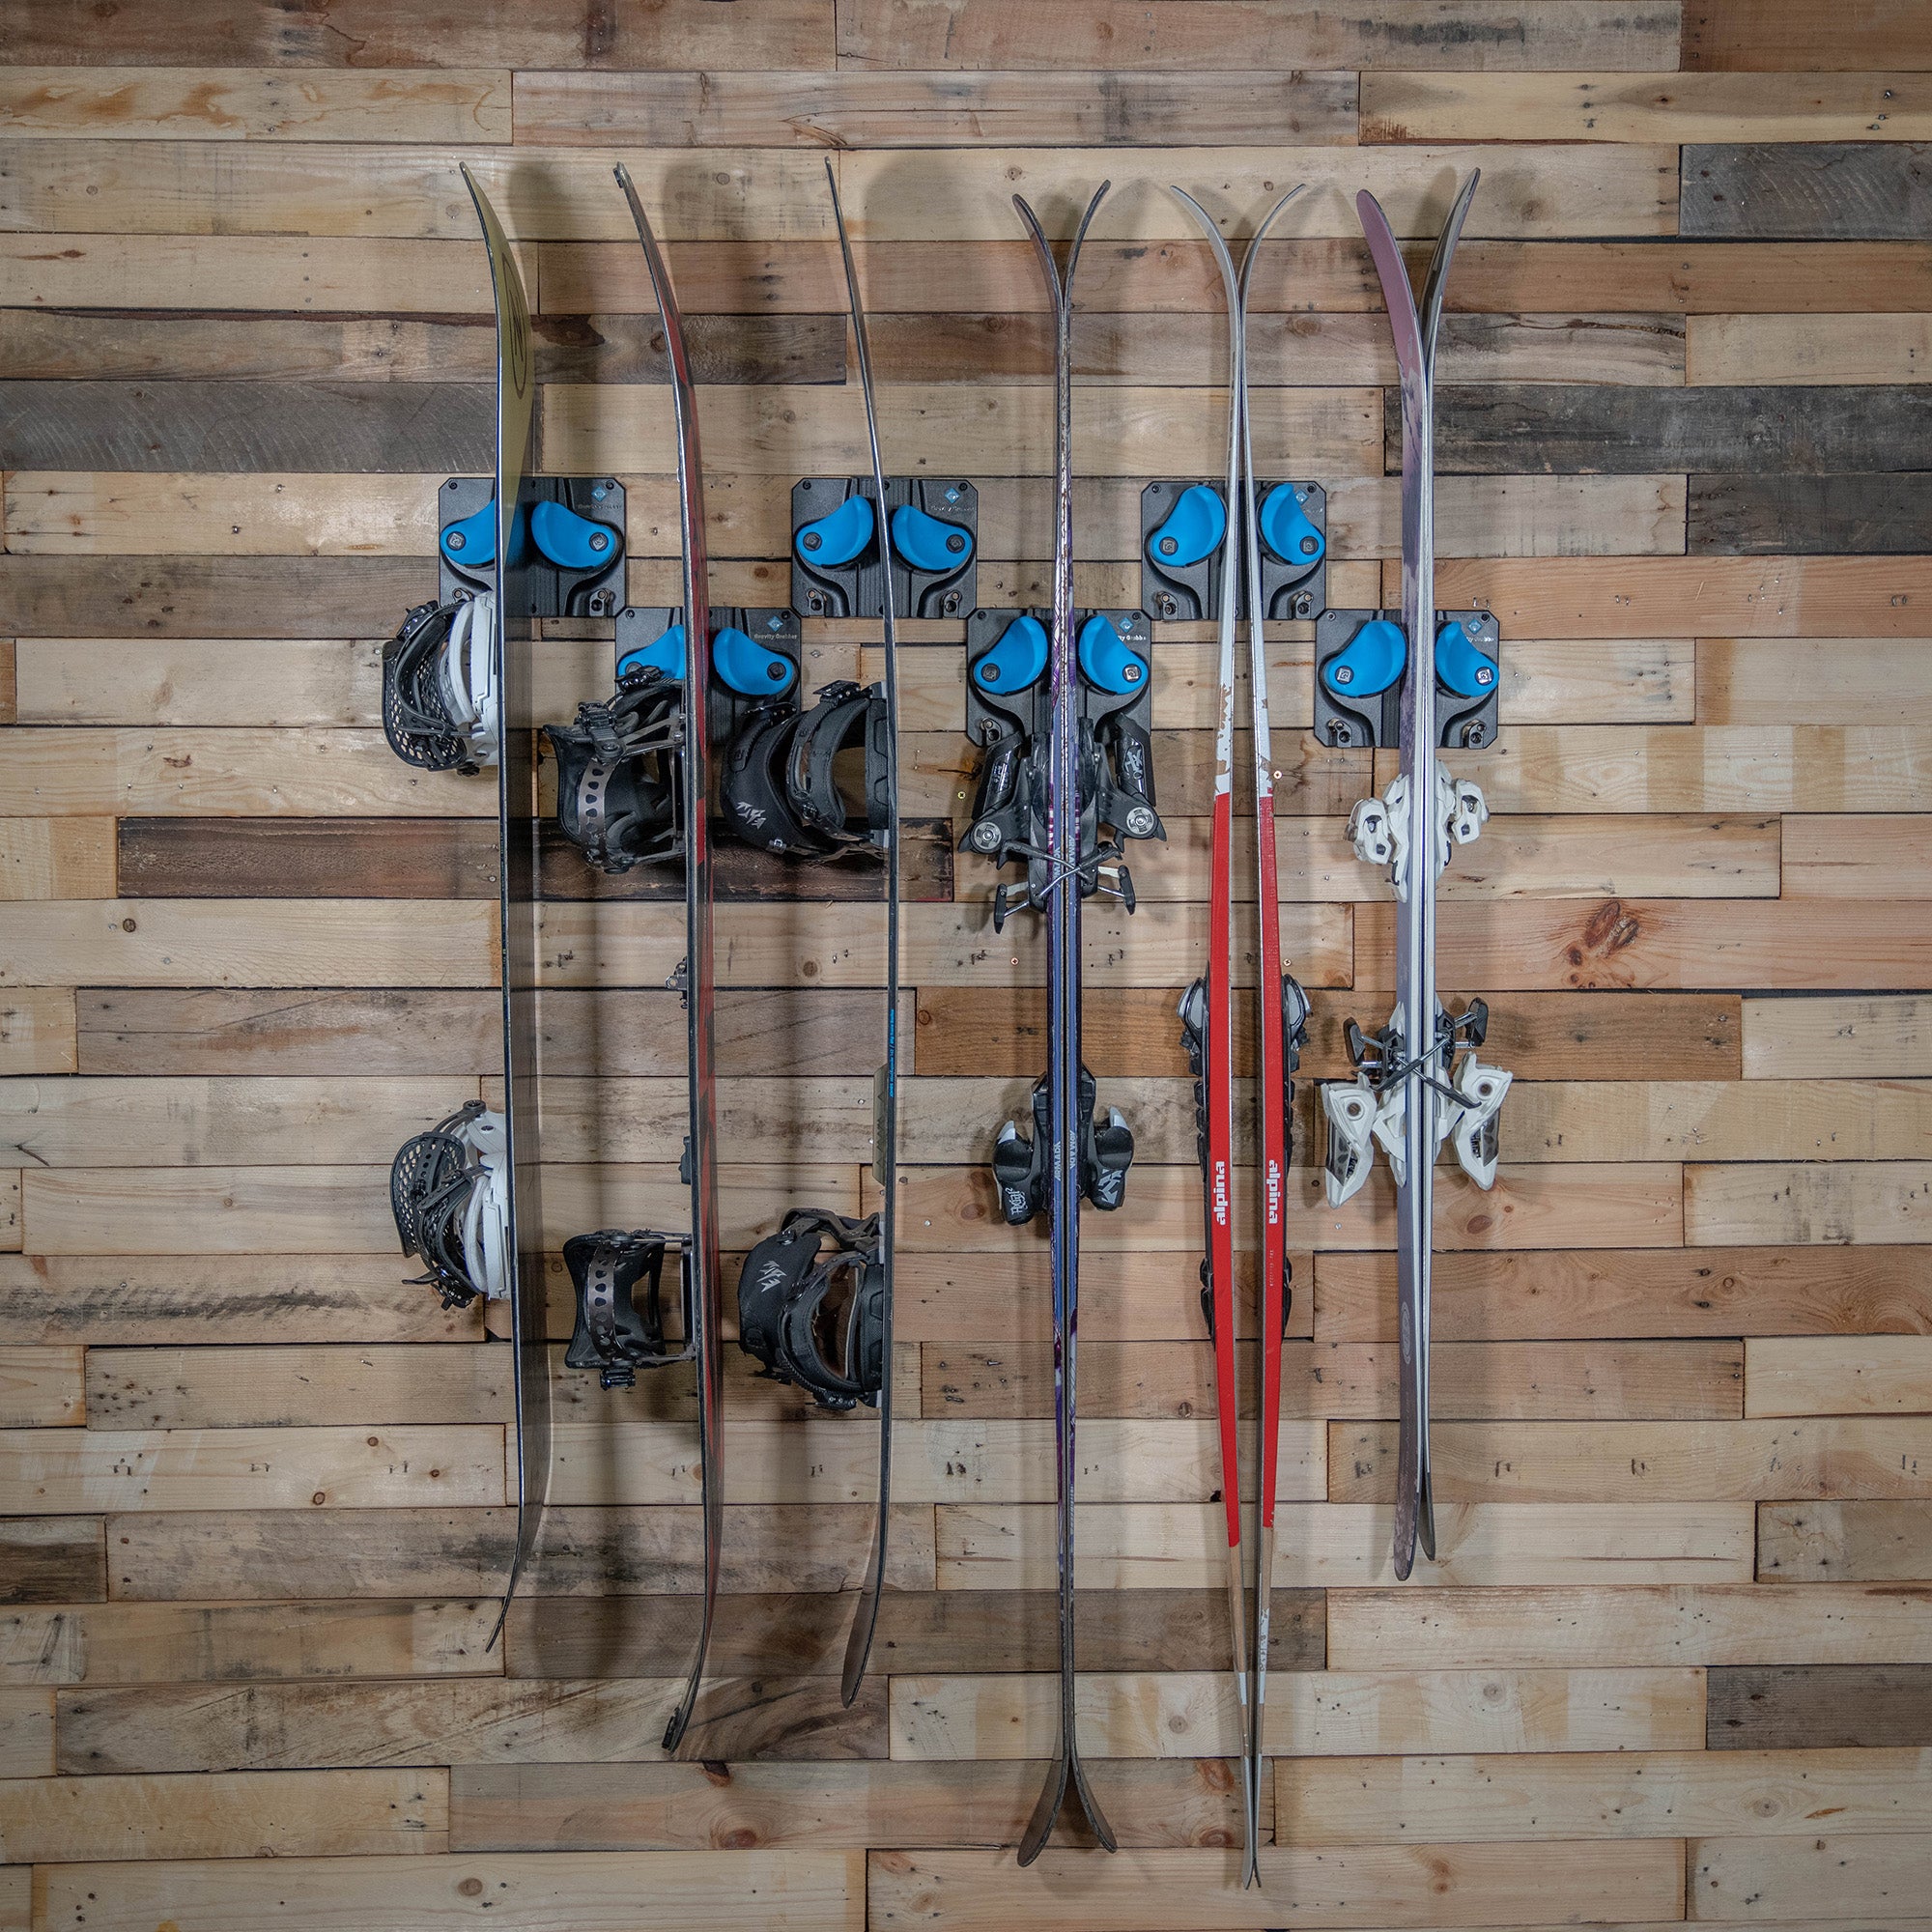 Locking Wall Racks for Skis and Snowboards  Skiing, Snowboard equipment,  Ski and snowboard